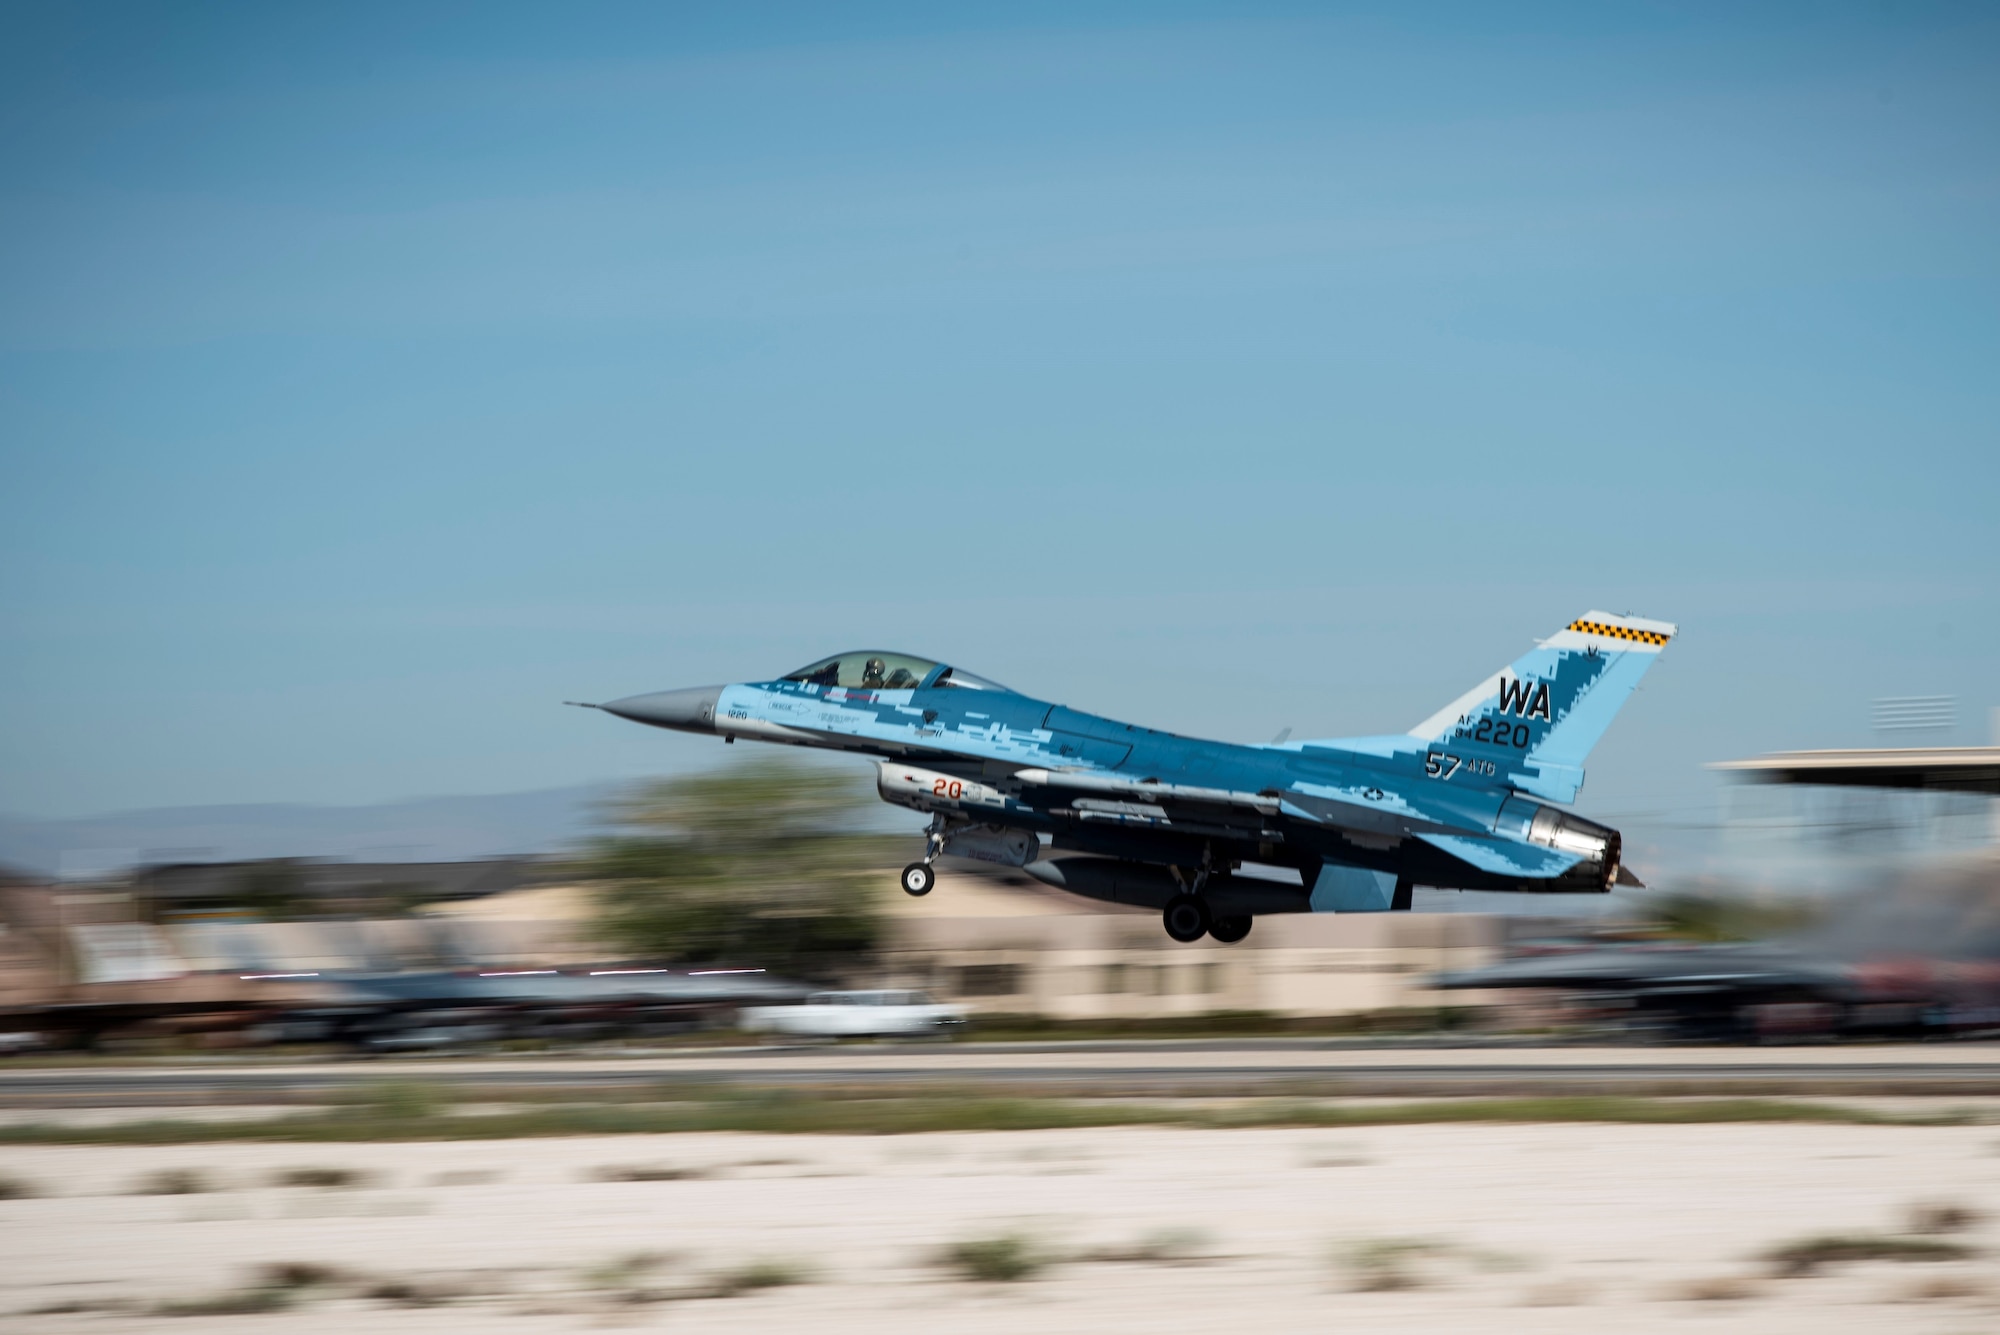 An F-16 Fighting Falcon fighter jet takes off.